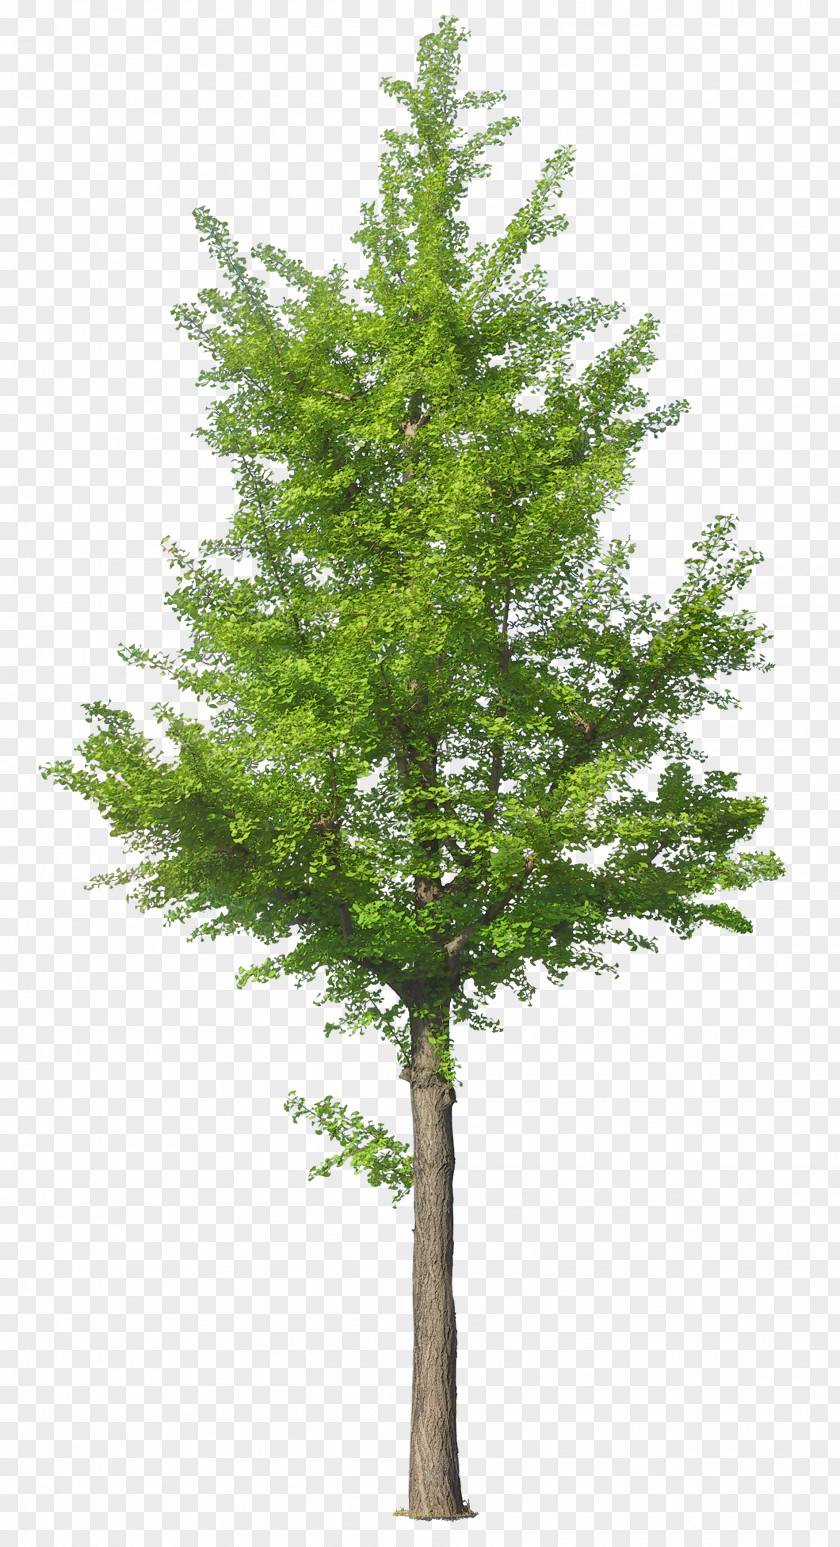 Plant A Tree PNG a tree clipart PNG